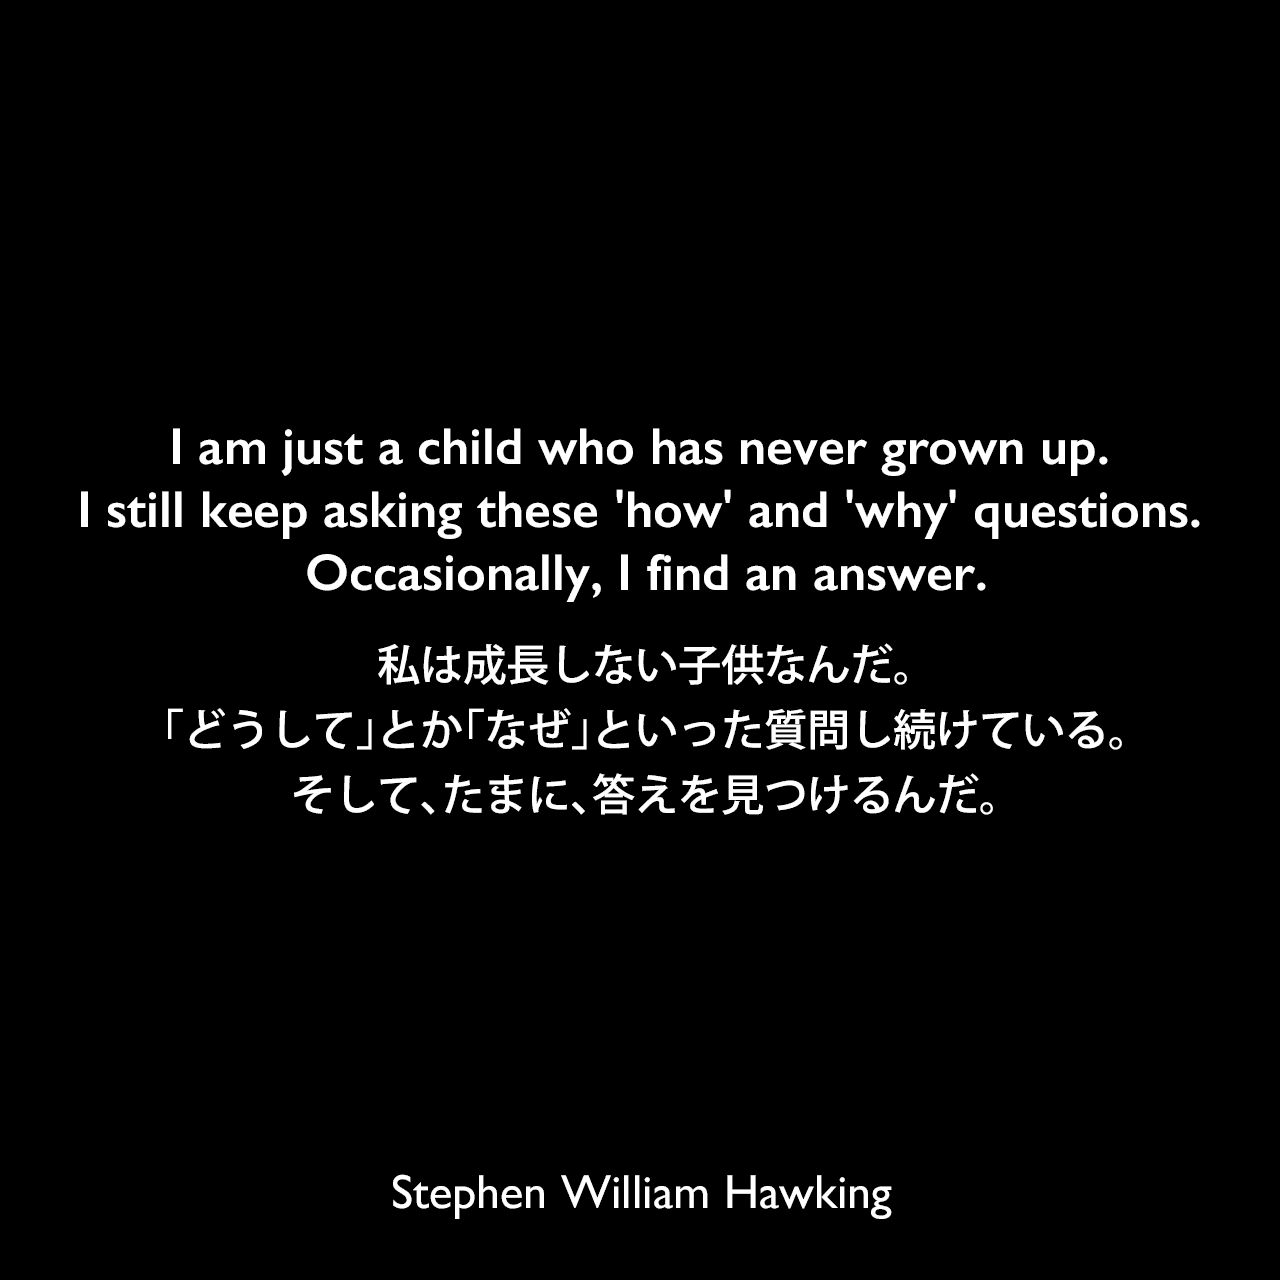 I am just a child who has never grown up. I still keep asking these 'how' and 'why' questions. Occasionally, I find an answer.私は成長しない子供なんだ。「どうして」とか「なぜ」といった質問し続けている。そして、たまに、答えを見つけるんだ。Stephen William Hawking